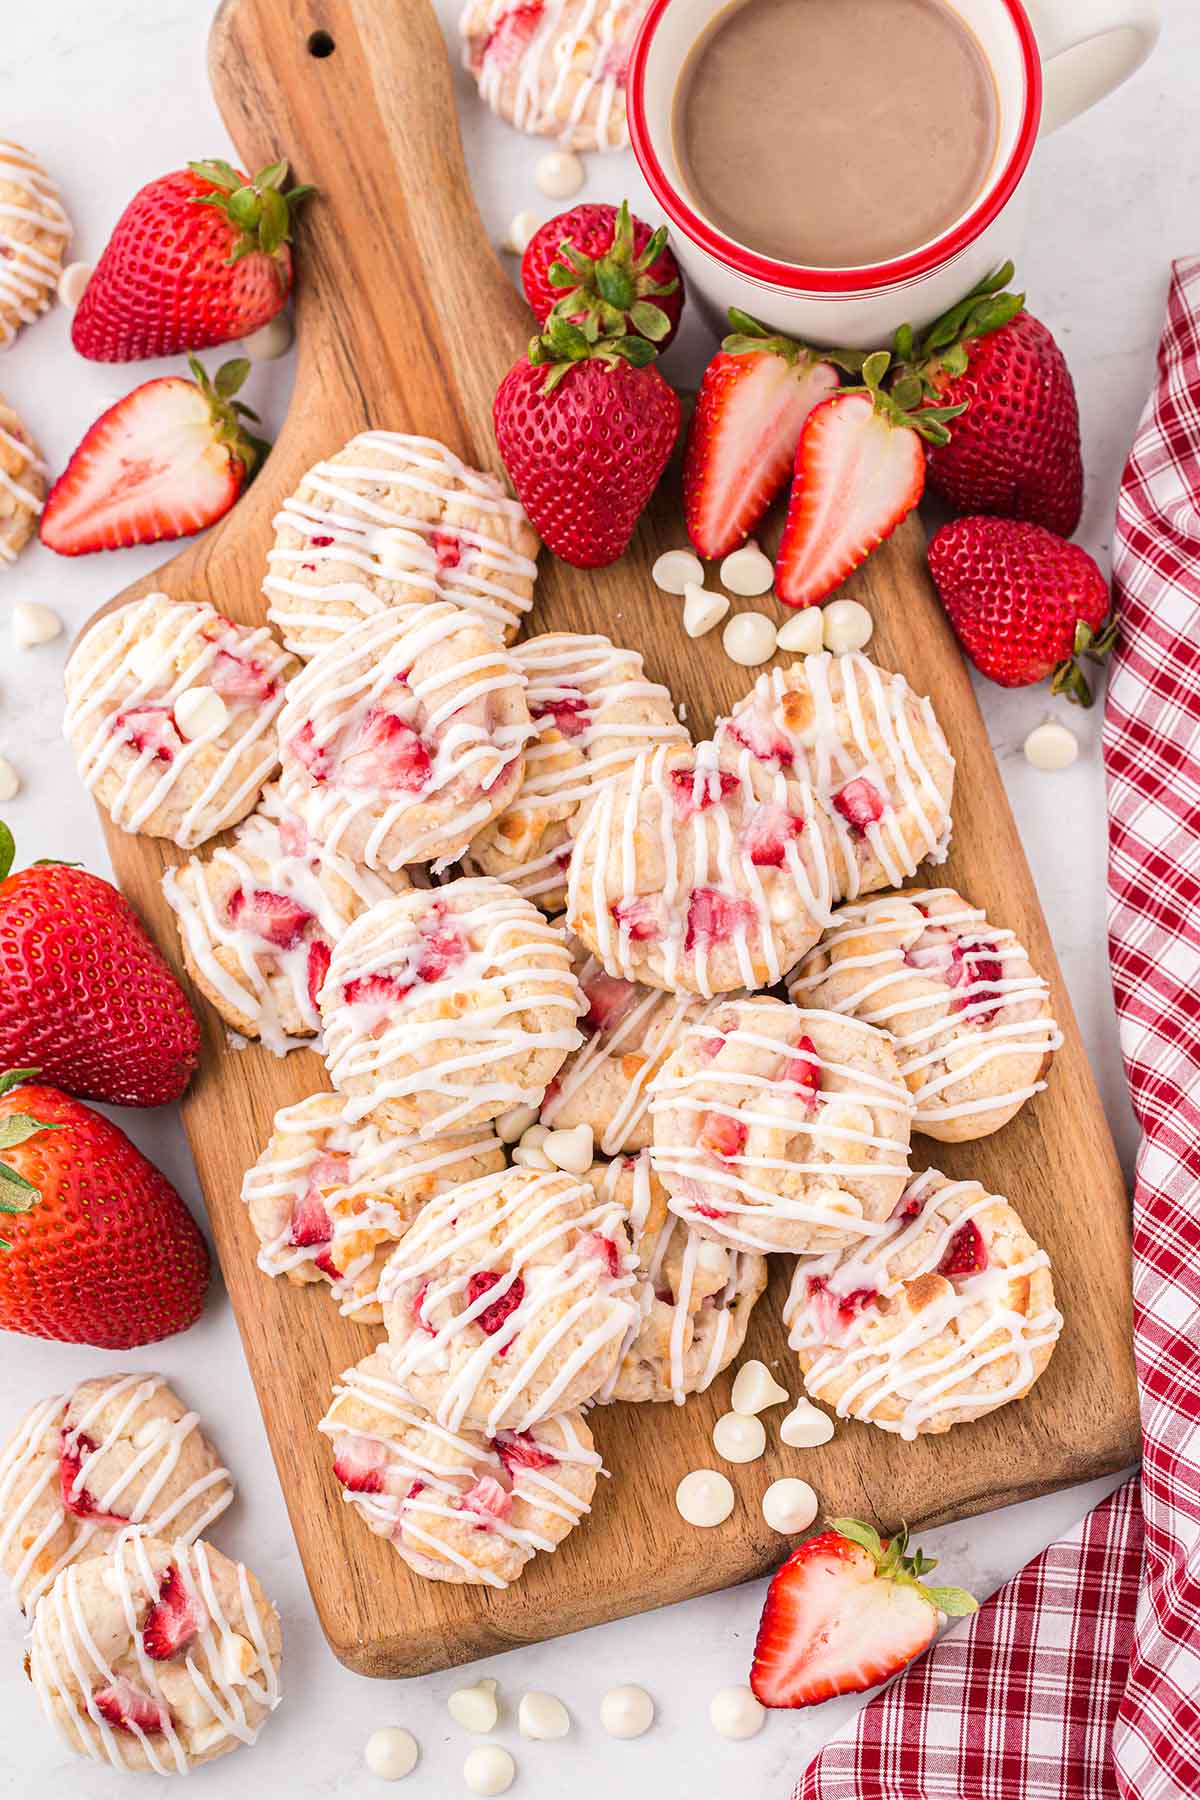 a couple of Strawberry Shortcake Cookies on a wooden board and some strawberries on the table.